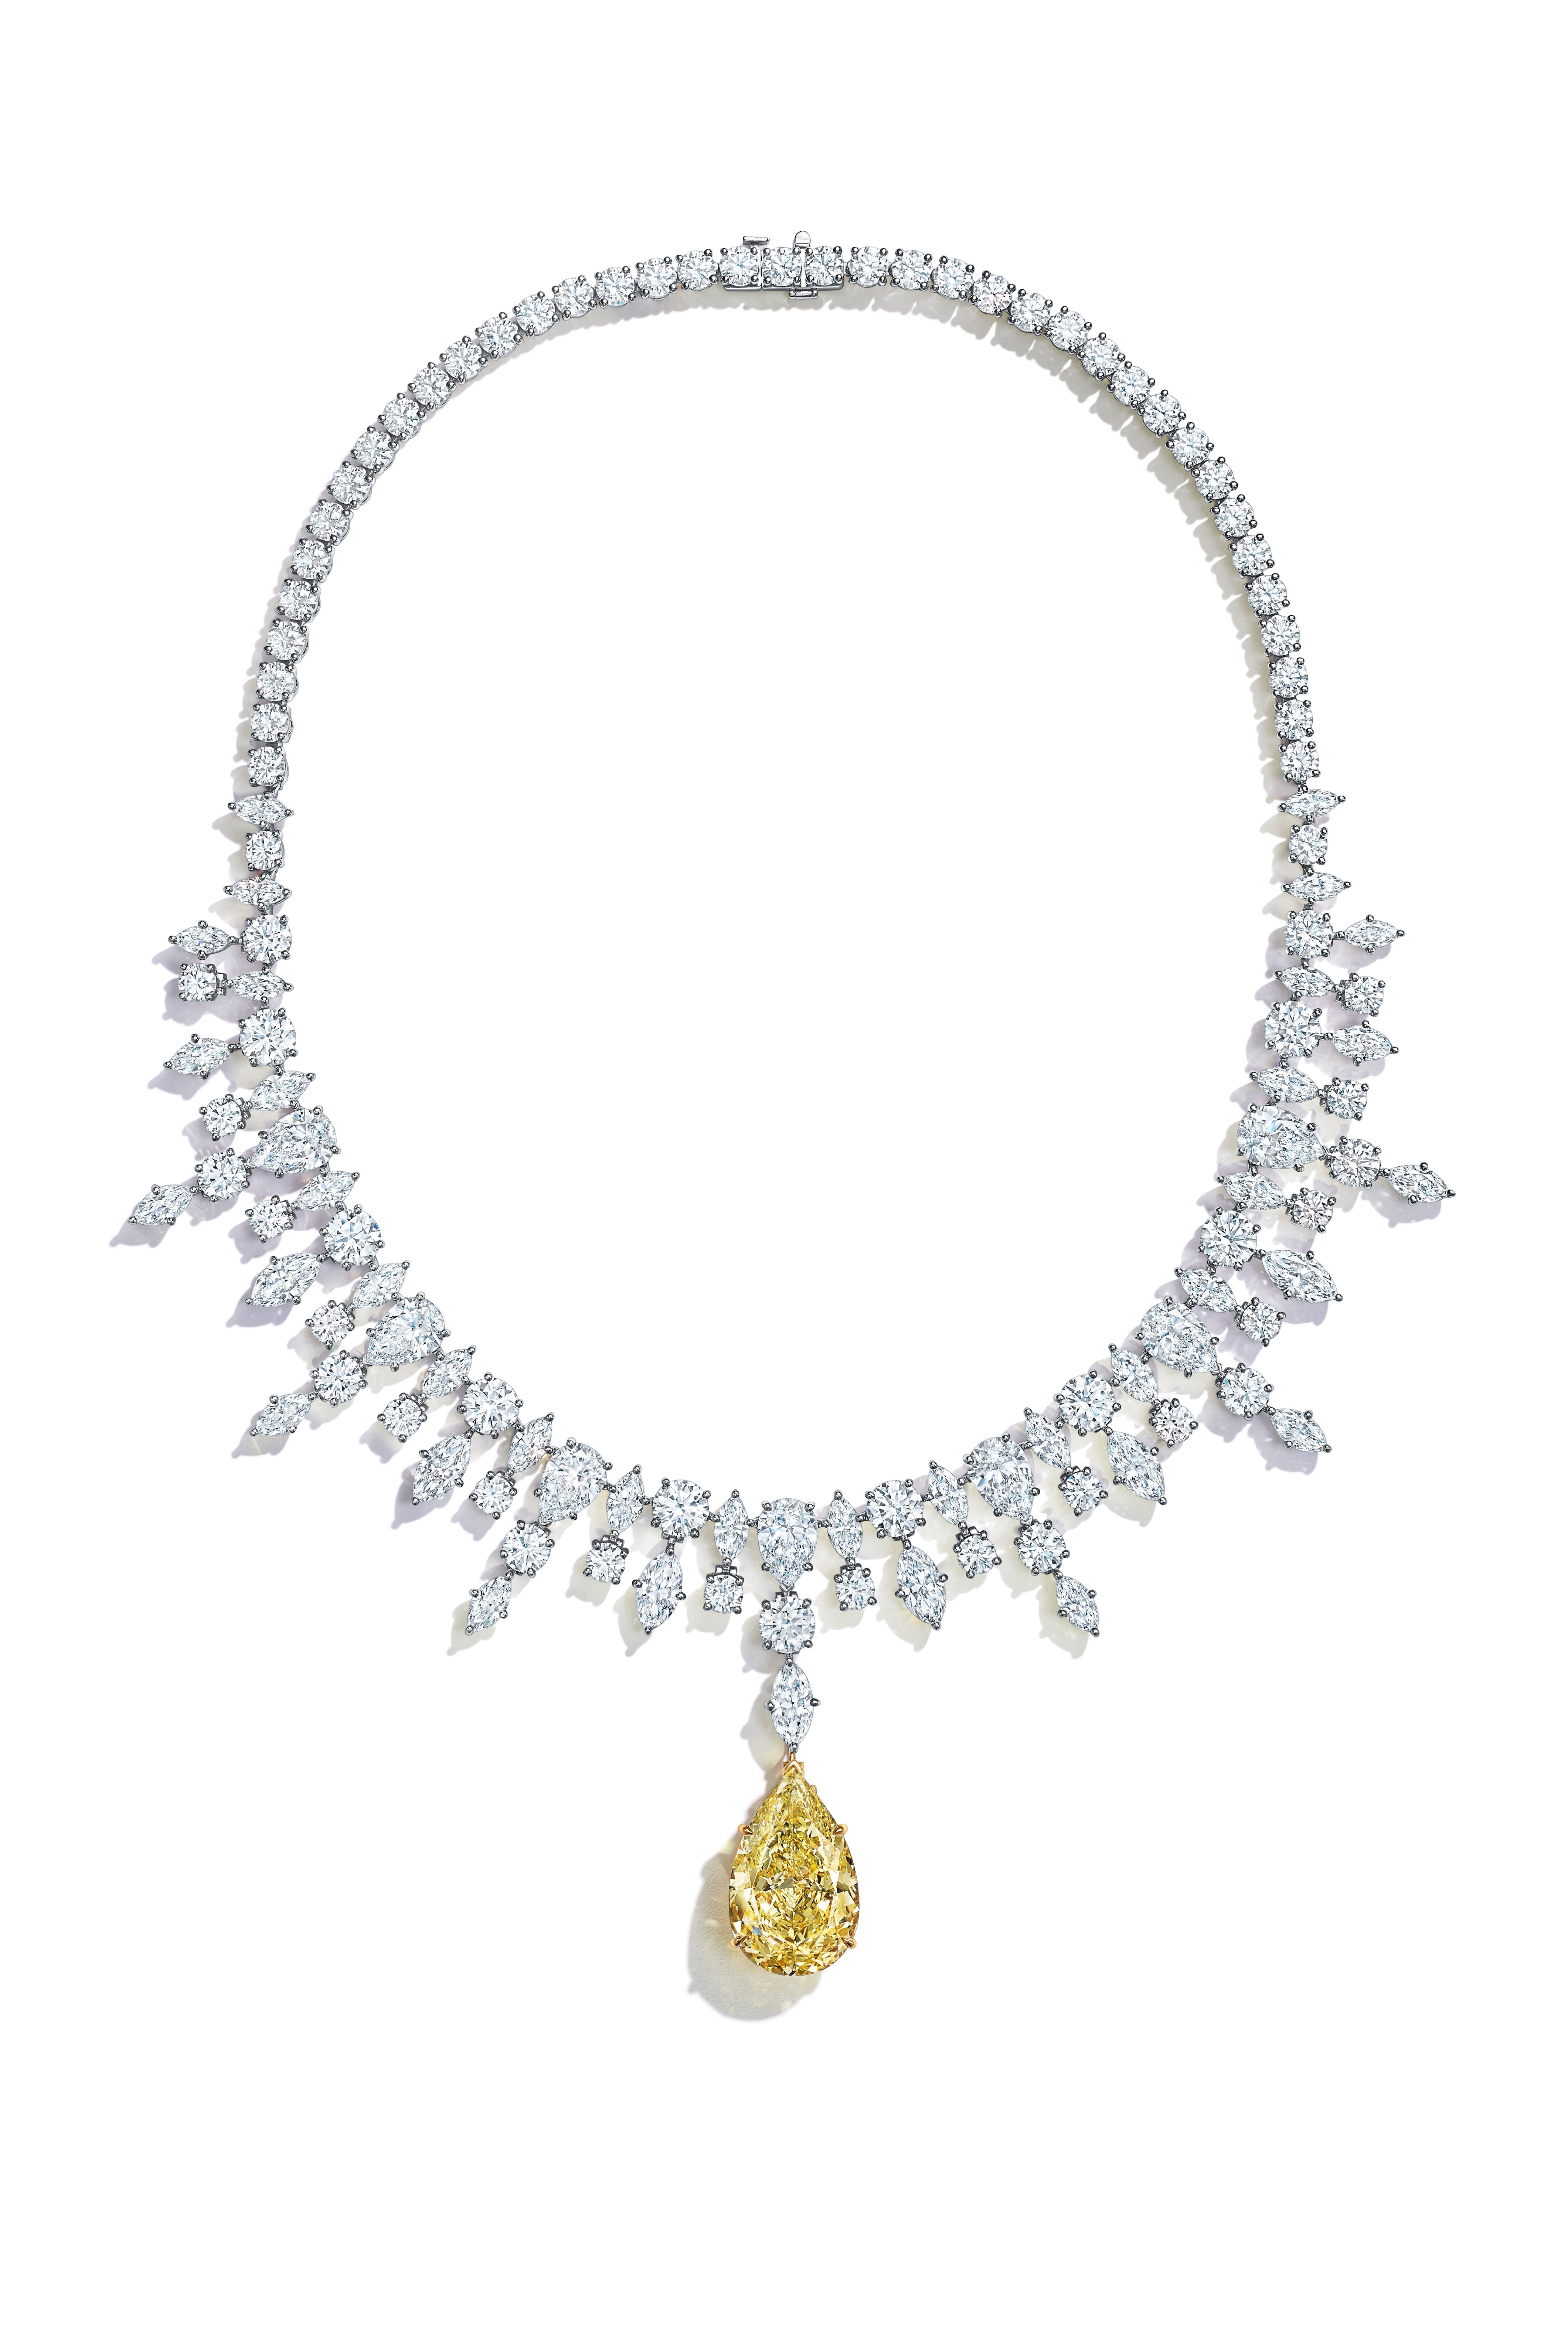 The Art of Craft How This Lavish New Necklace From Tiffany & Co